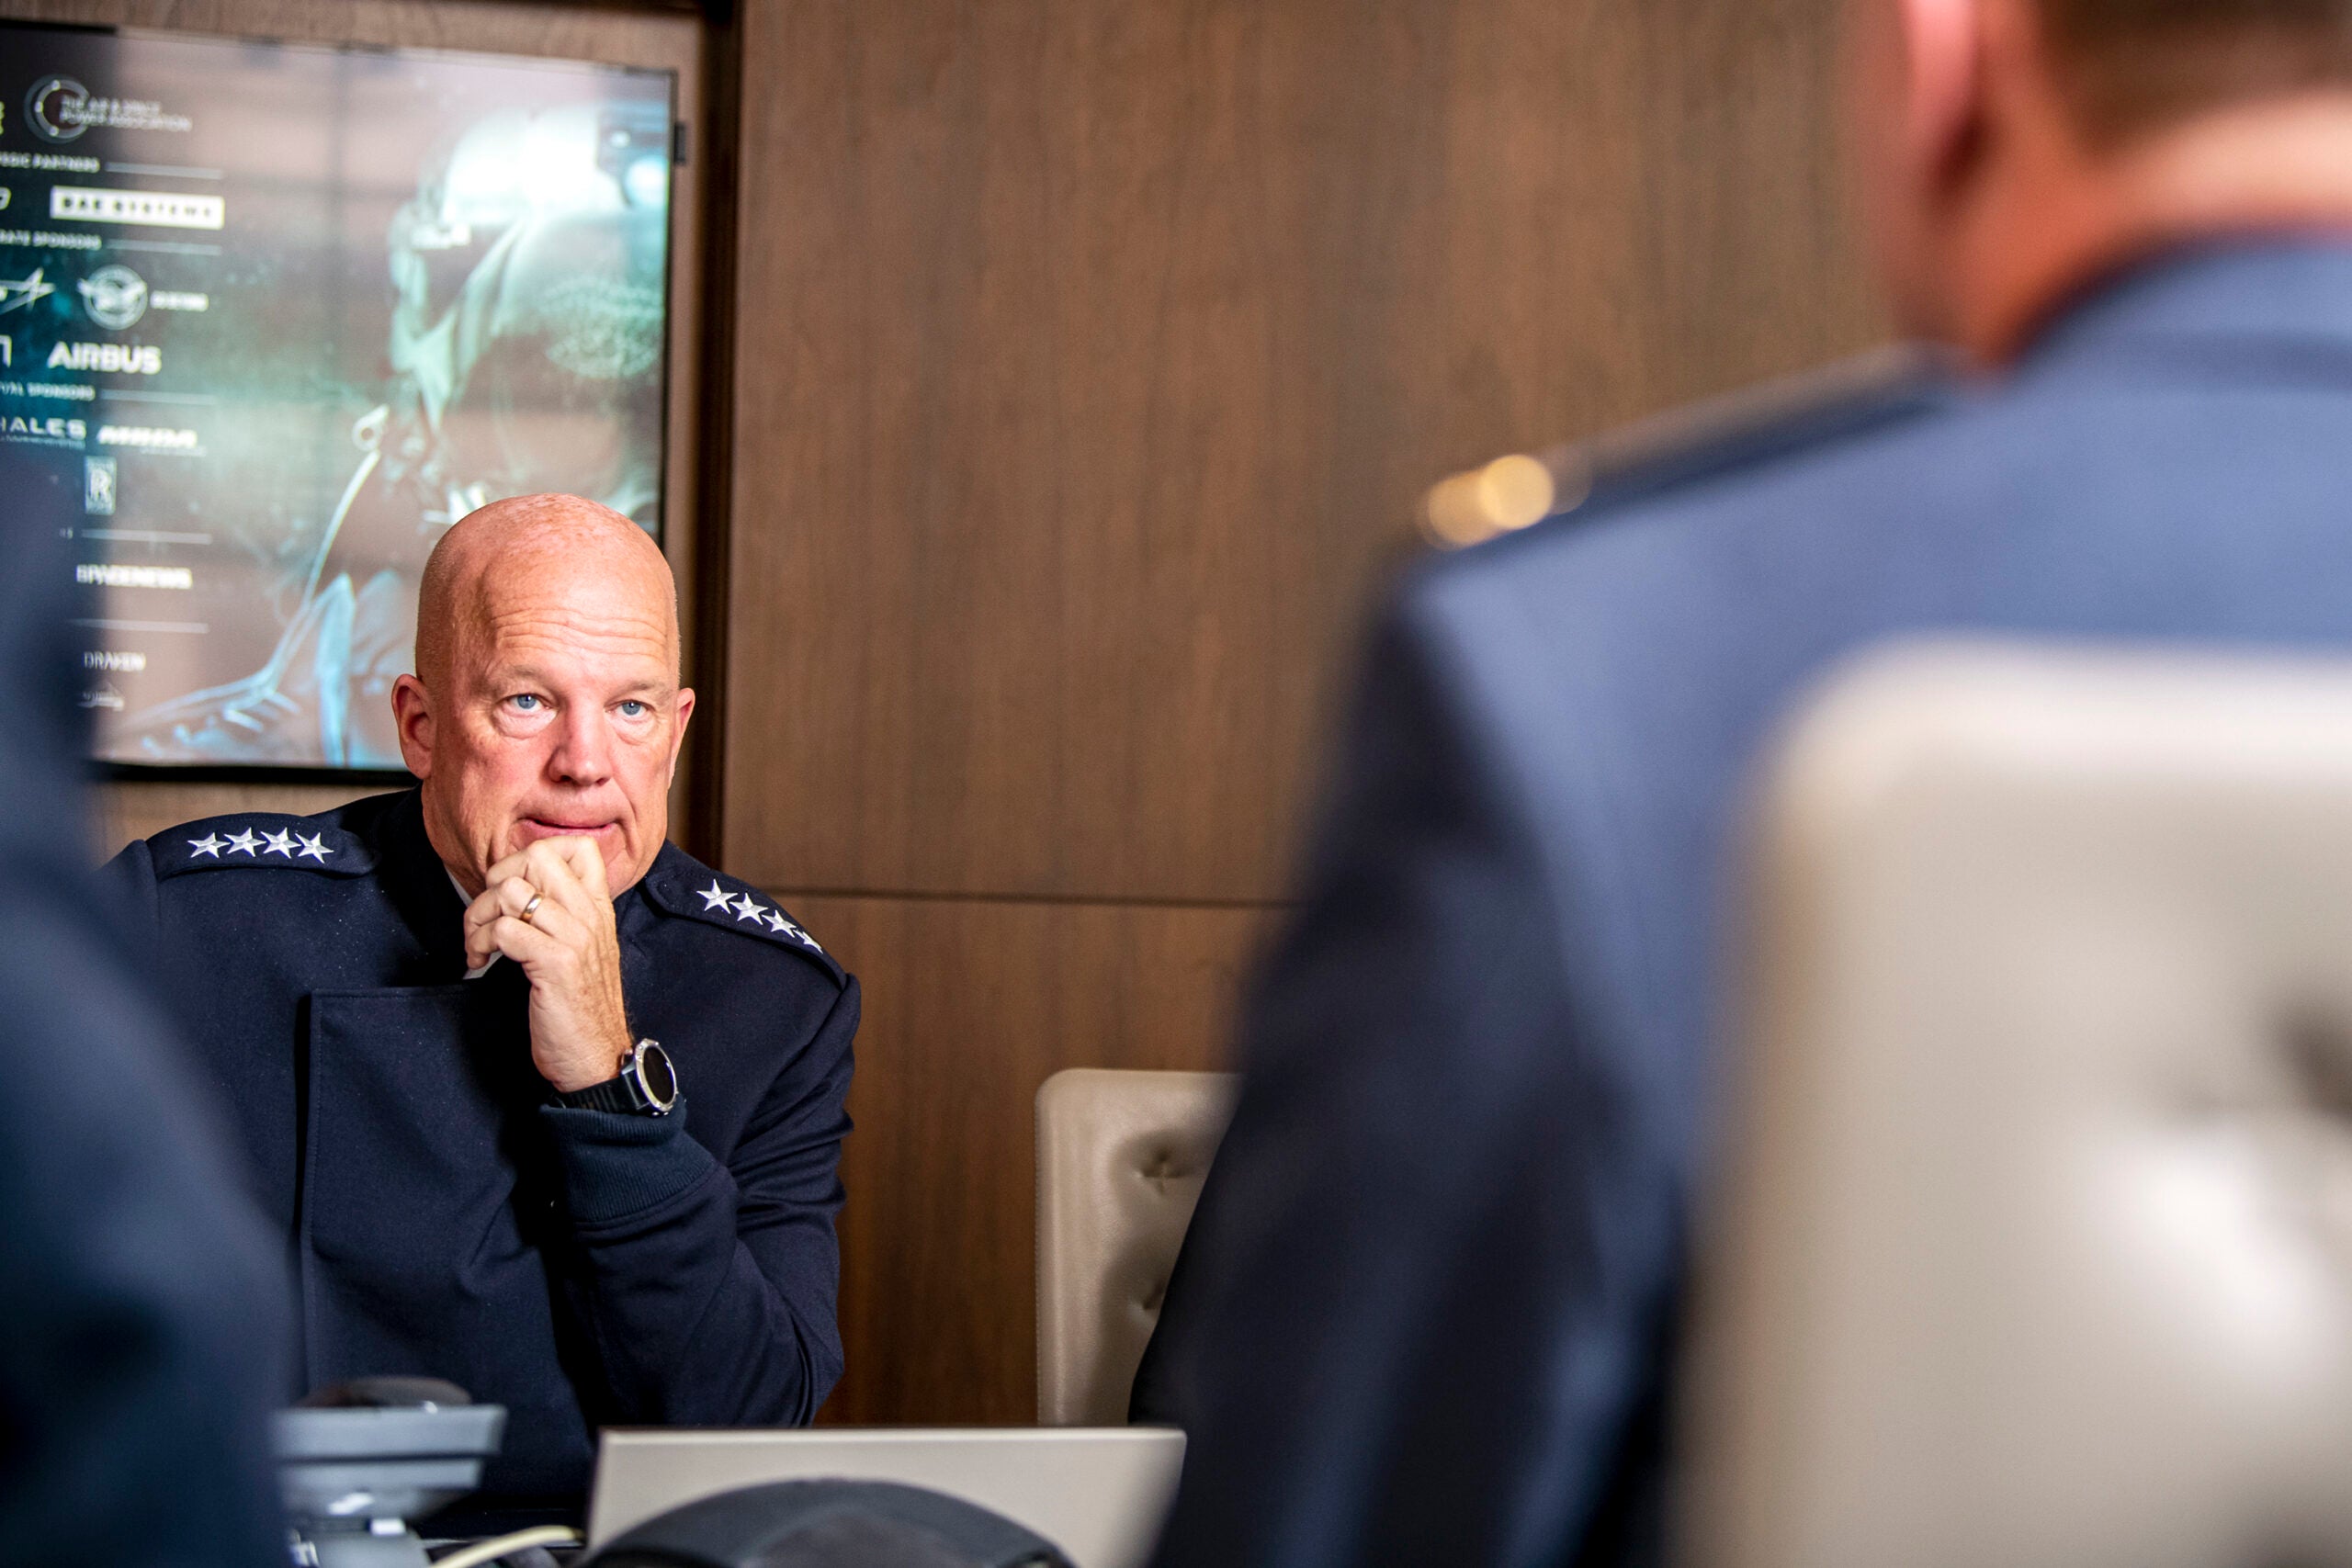 Gen. John W. “Jay” Raymond, Chief of Space Operations, speaks with leadership from the Royal Air Force during the Global Air and Space Chiefs Conference in London, England, July 13, 2022. During the GASCC, Raymond served as a keynote speaker and discussed maintaining our edge in space as well as the Department of the Air Force commitment to NATO allies and European security. (U.S. Air Force photo by Staff Sgt. Eugene Oliver)